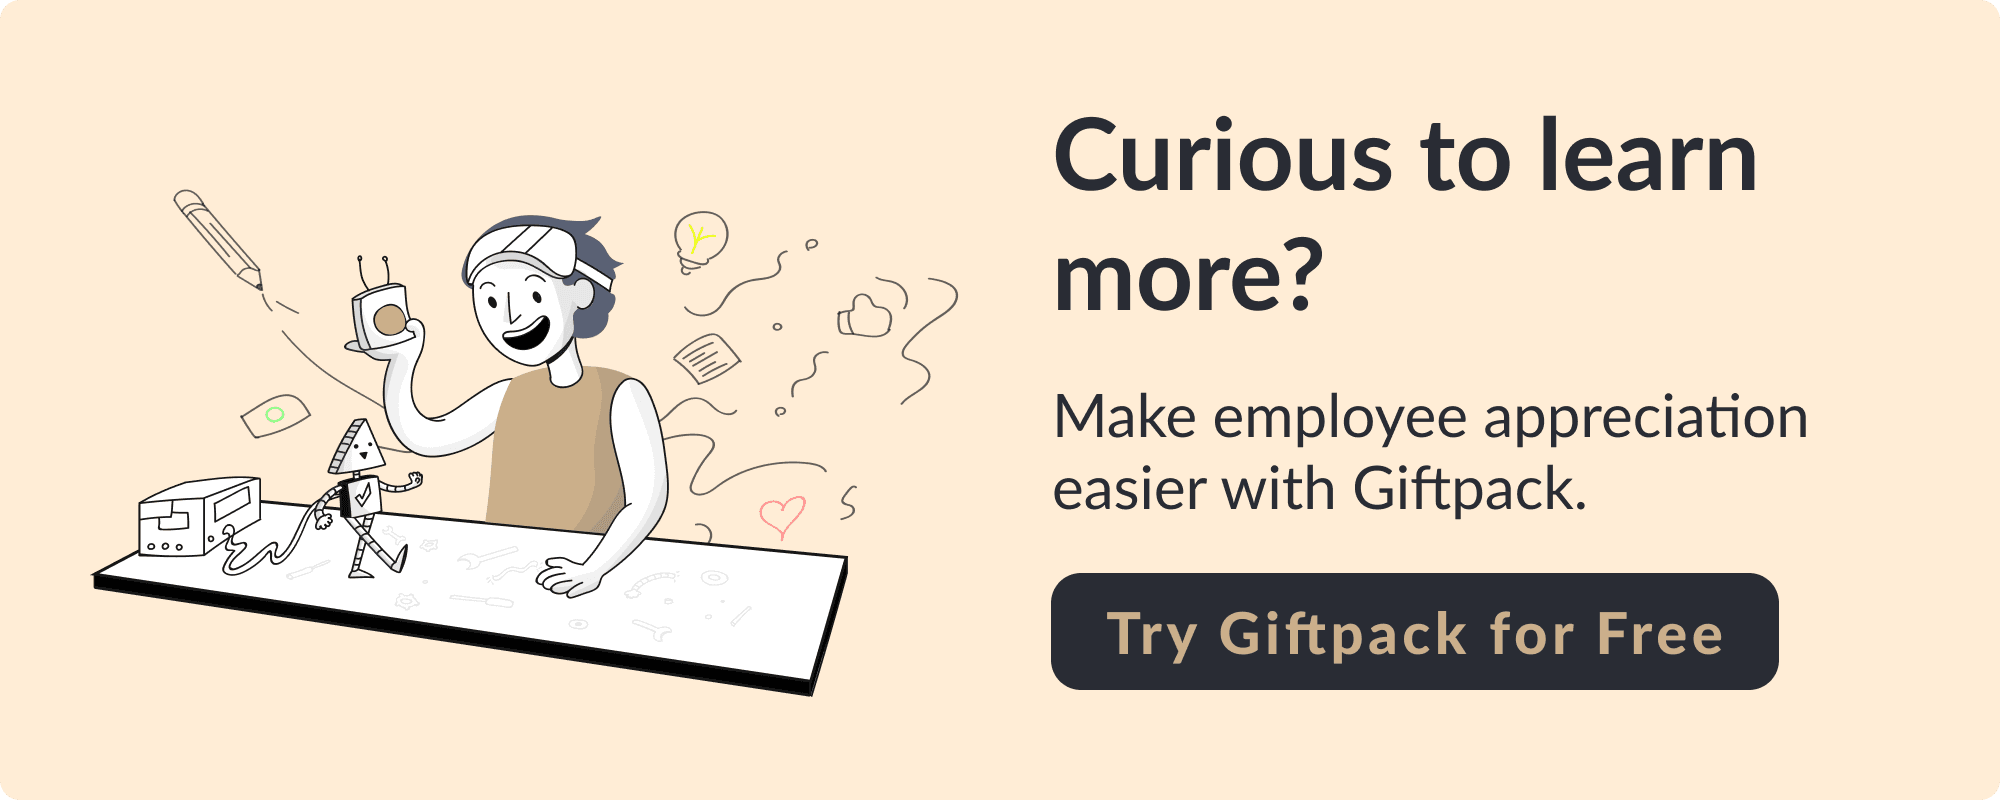 Curious to learn more? Make employee appreciation easier with Giftpack